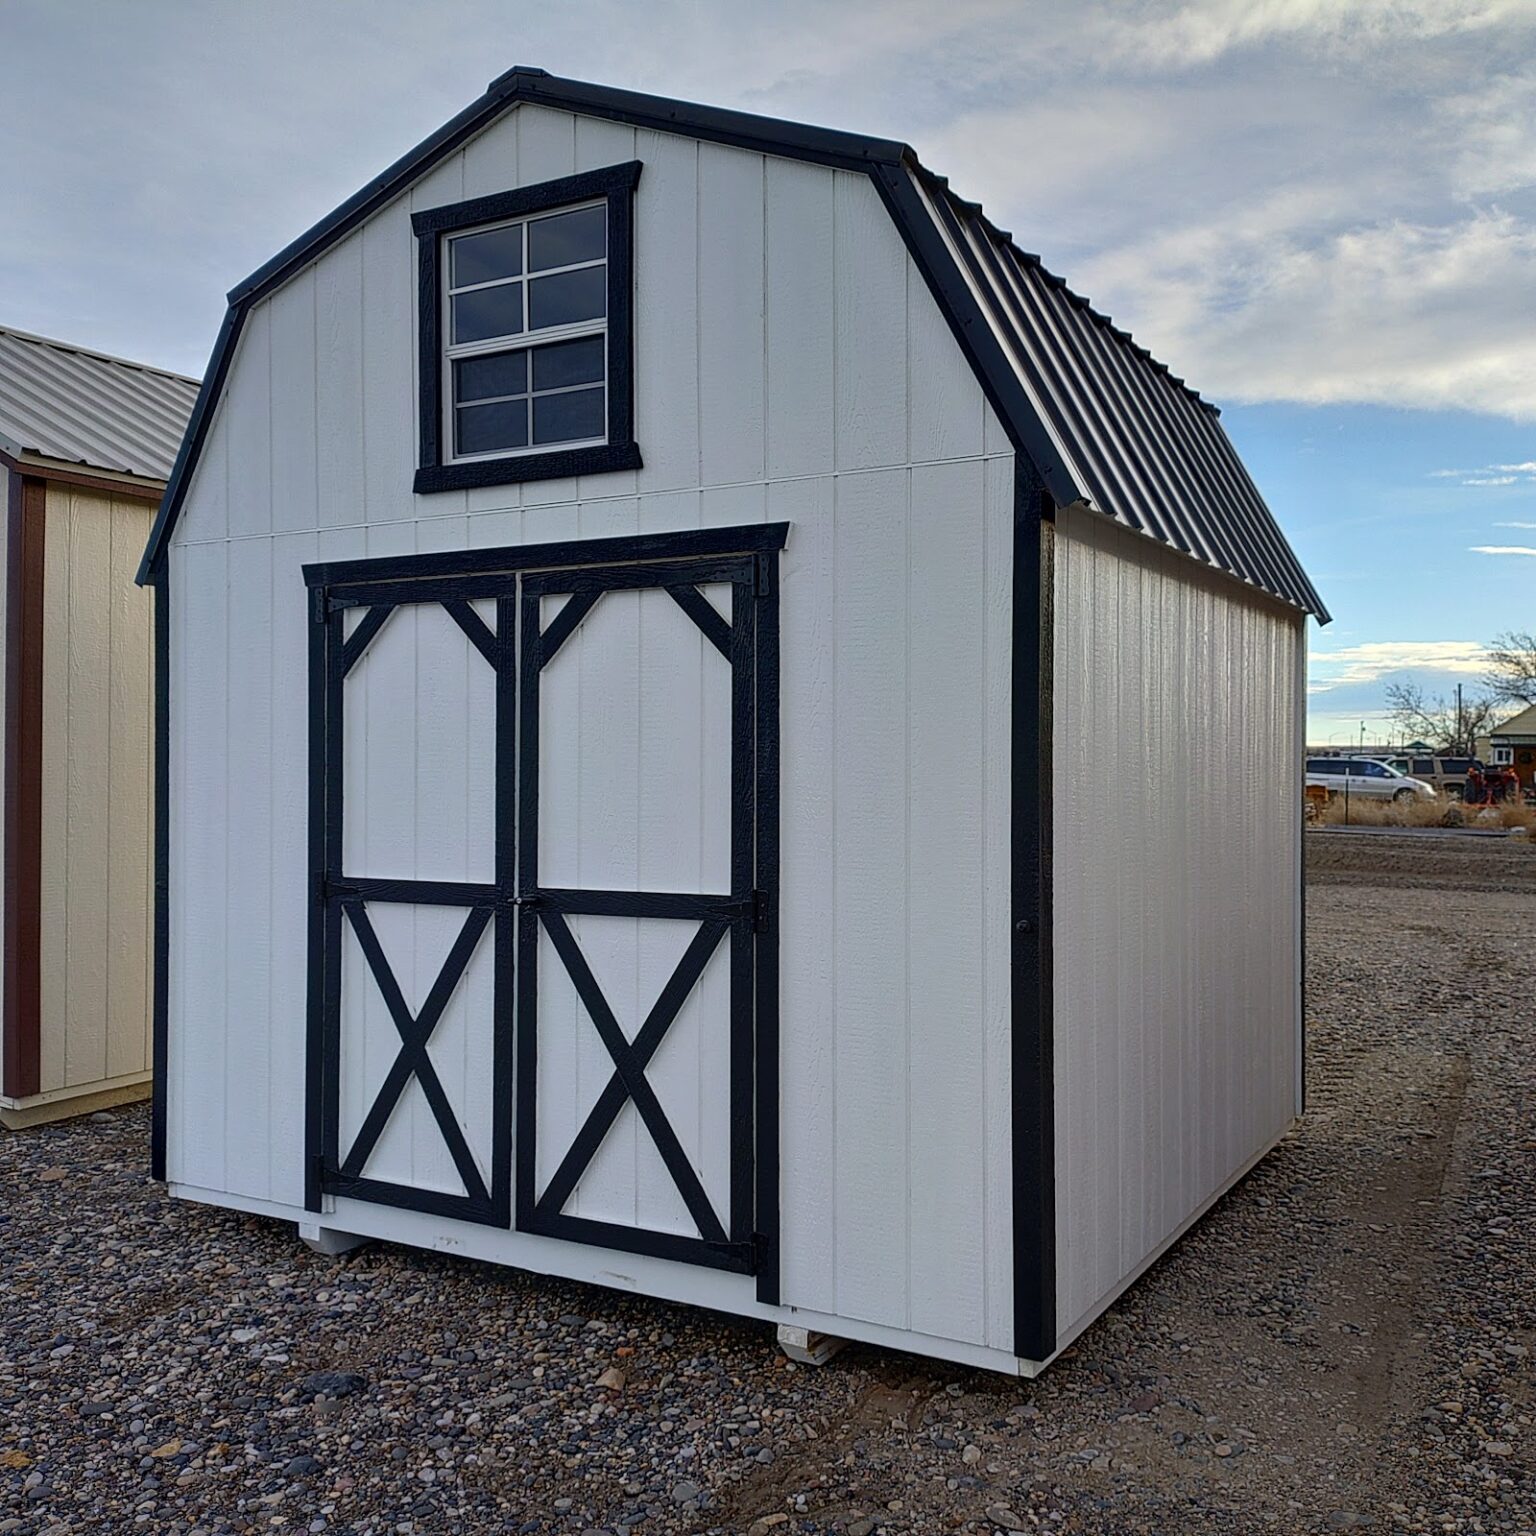 A classy White and Black 10x10 barn with a window in the gable and double barn doors beneath the window.